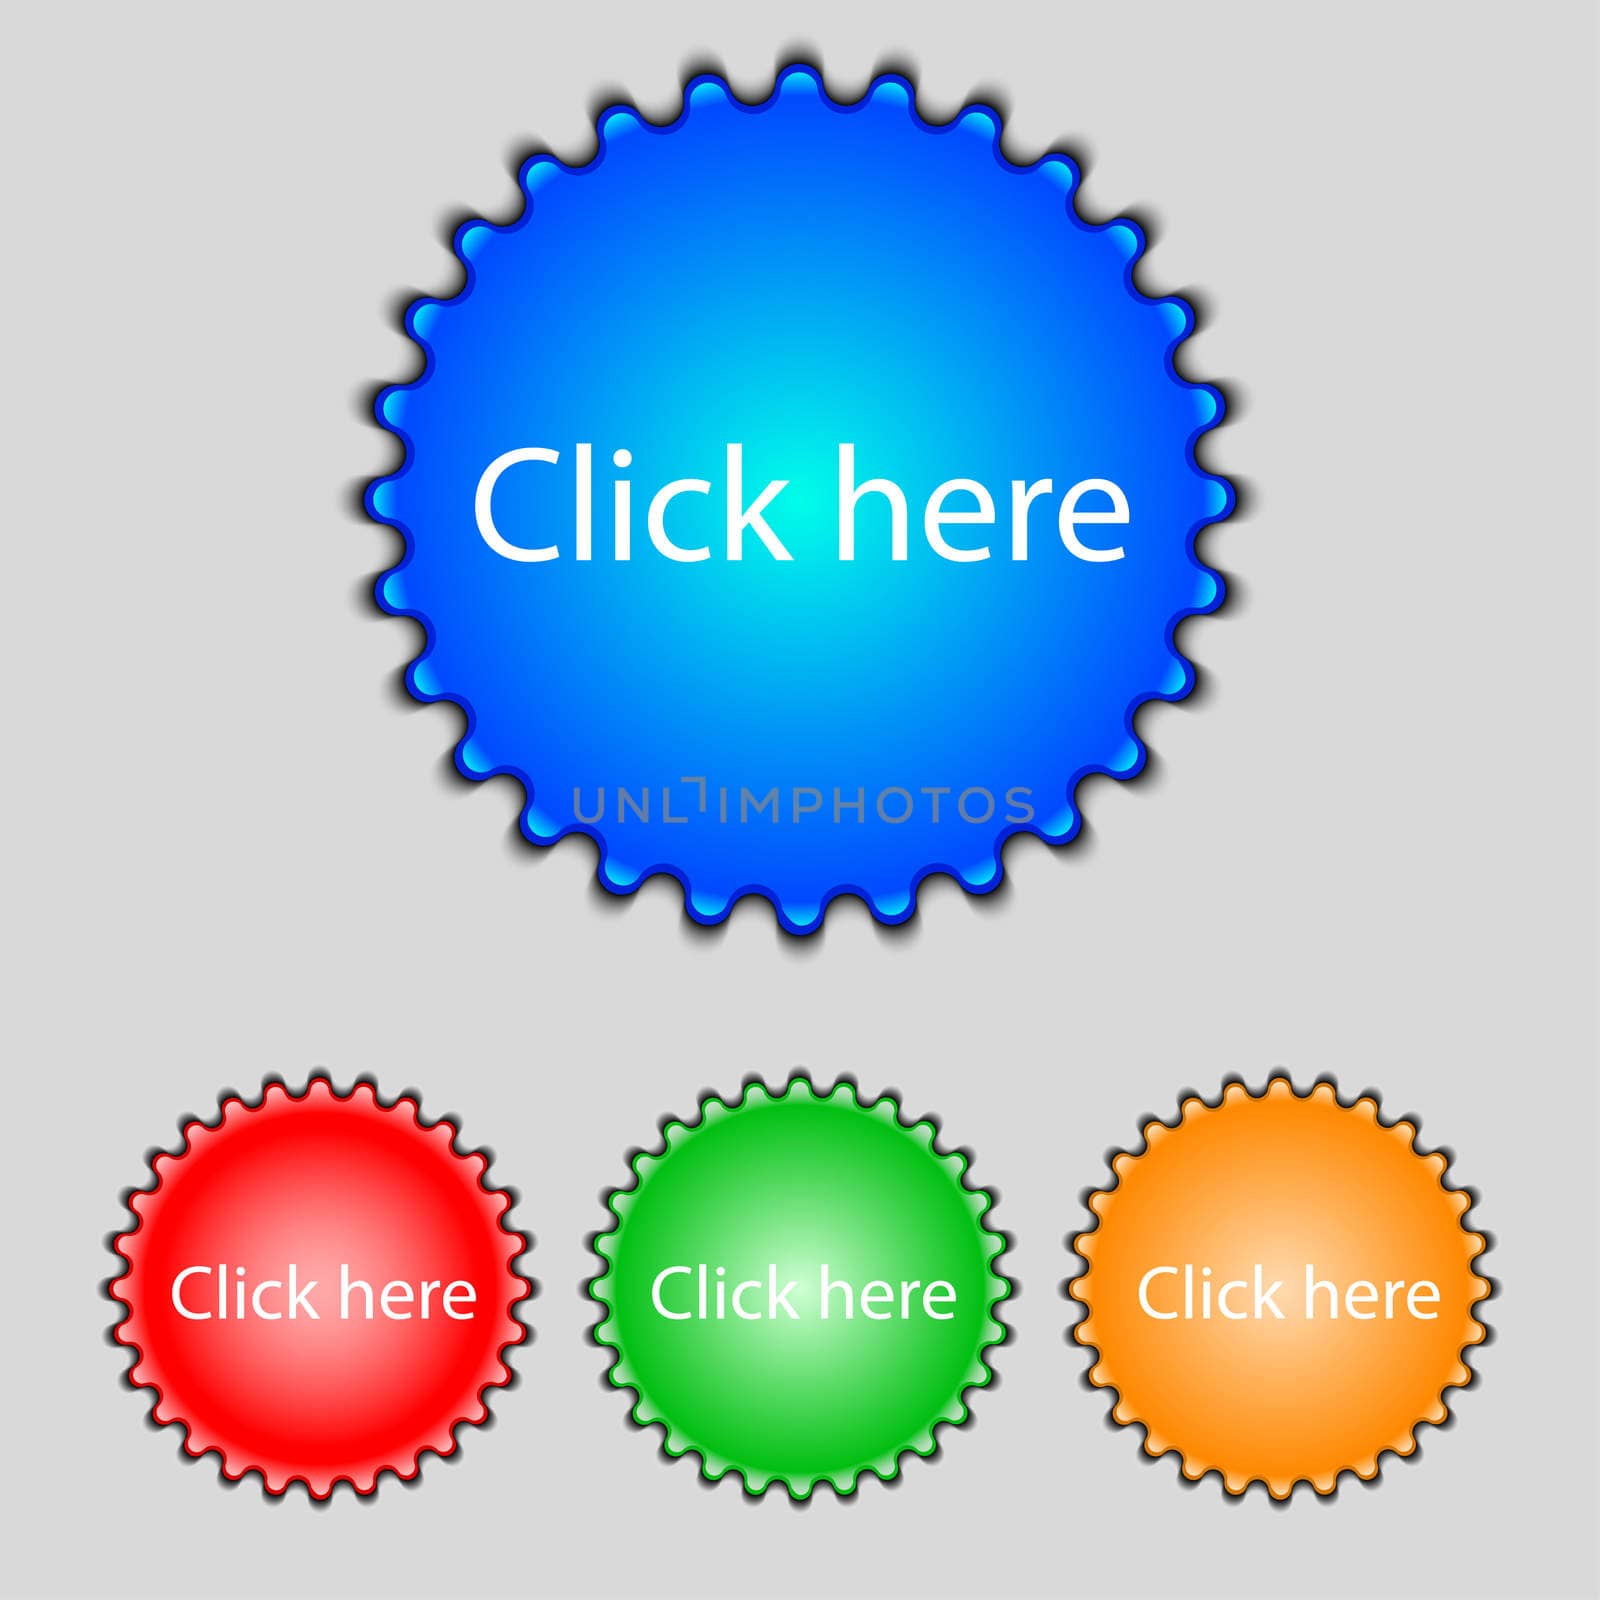 Click here sign icon. Press button. Set of colored buttons. illustration